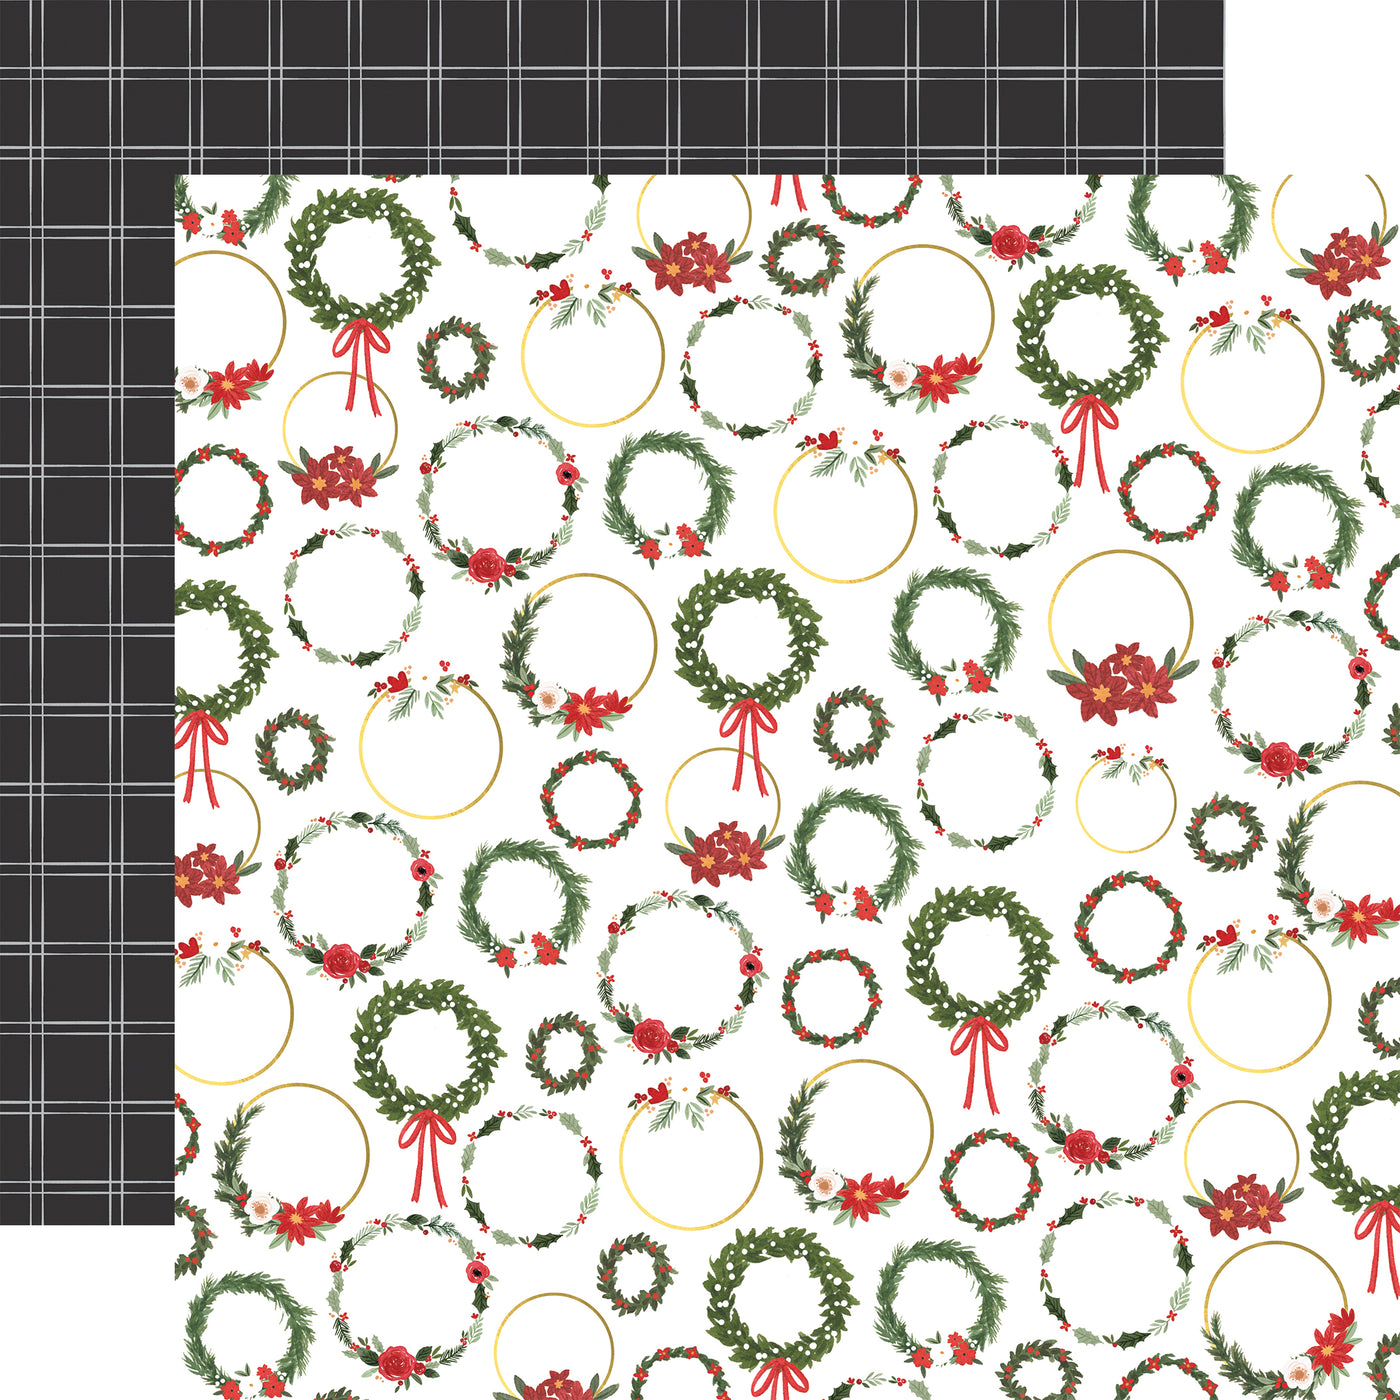 Side A - Christmas wreaths on white background. Side B - Black and white plaid.